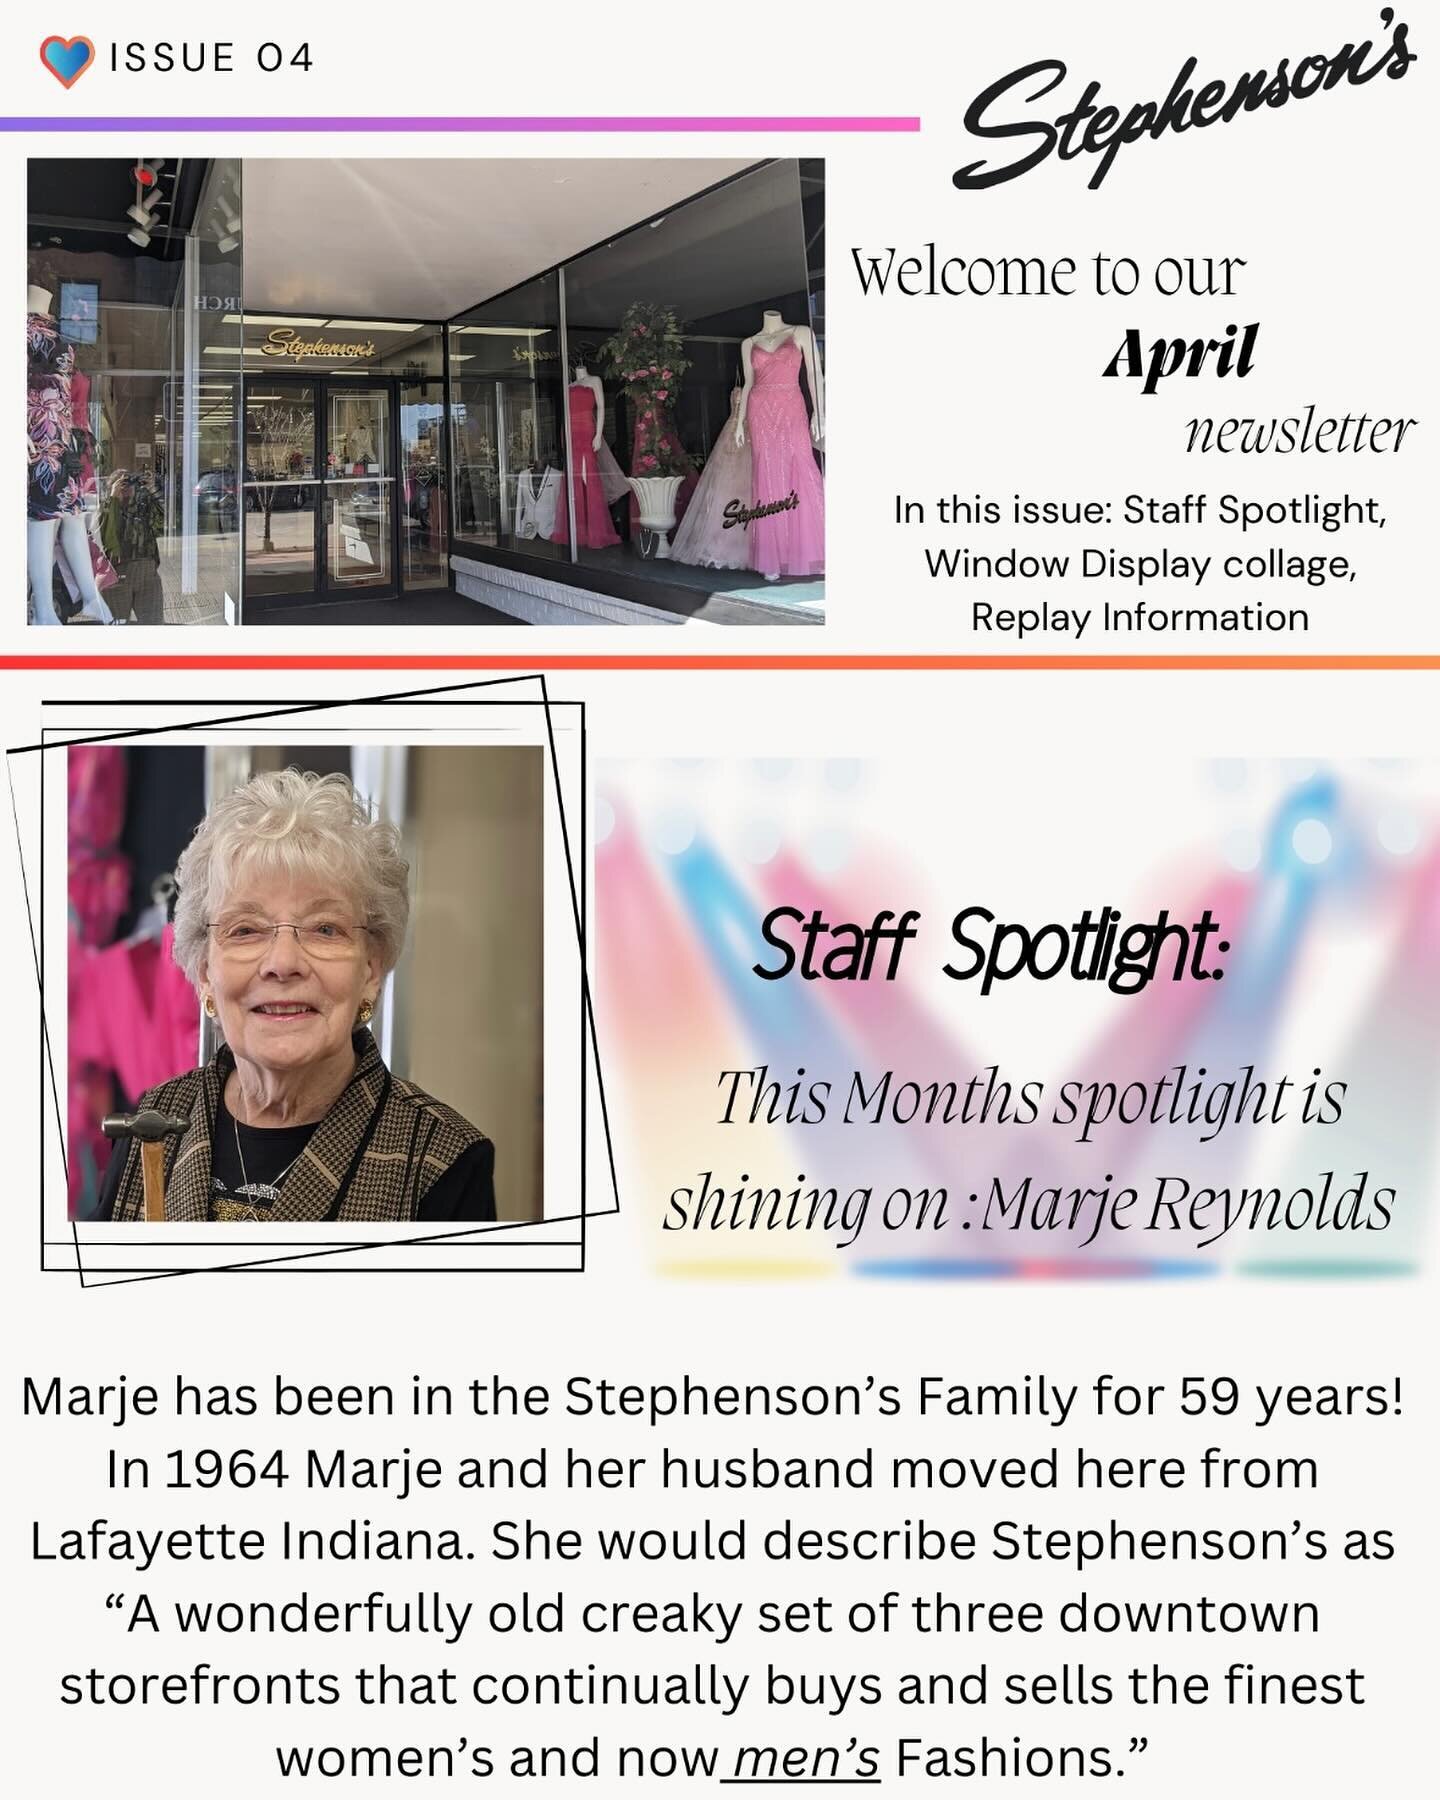 Welcome back to Stephenson&rsquo;s Staff Spotlights! 
This month we are celebrating Marje!! Check out Marje&rsquo;s bio for a little bit about her, as well as some of her favorite window displays!! Have any favorite Marje memories?? Let us know ❤️

W